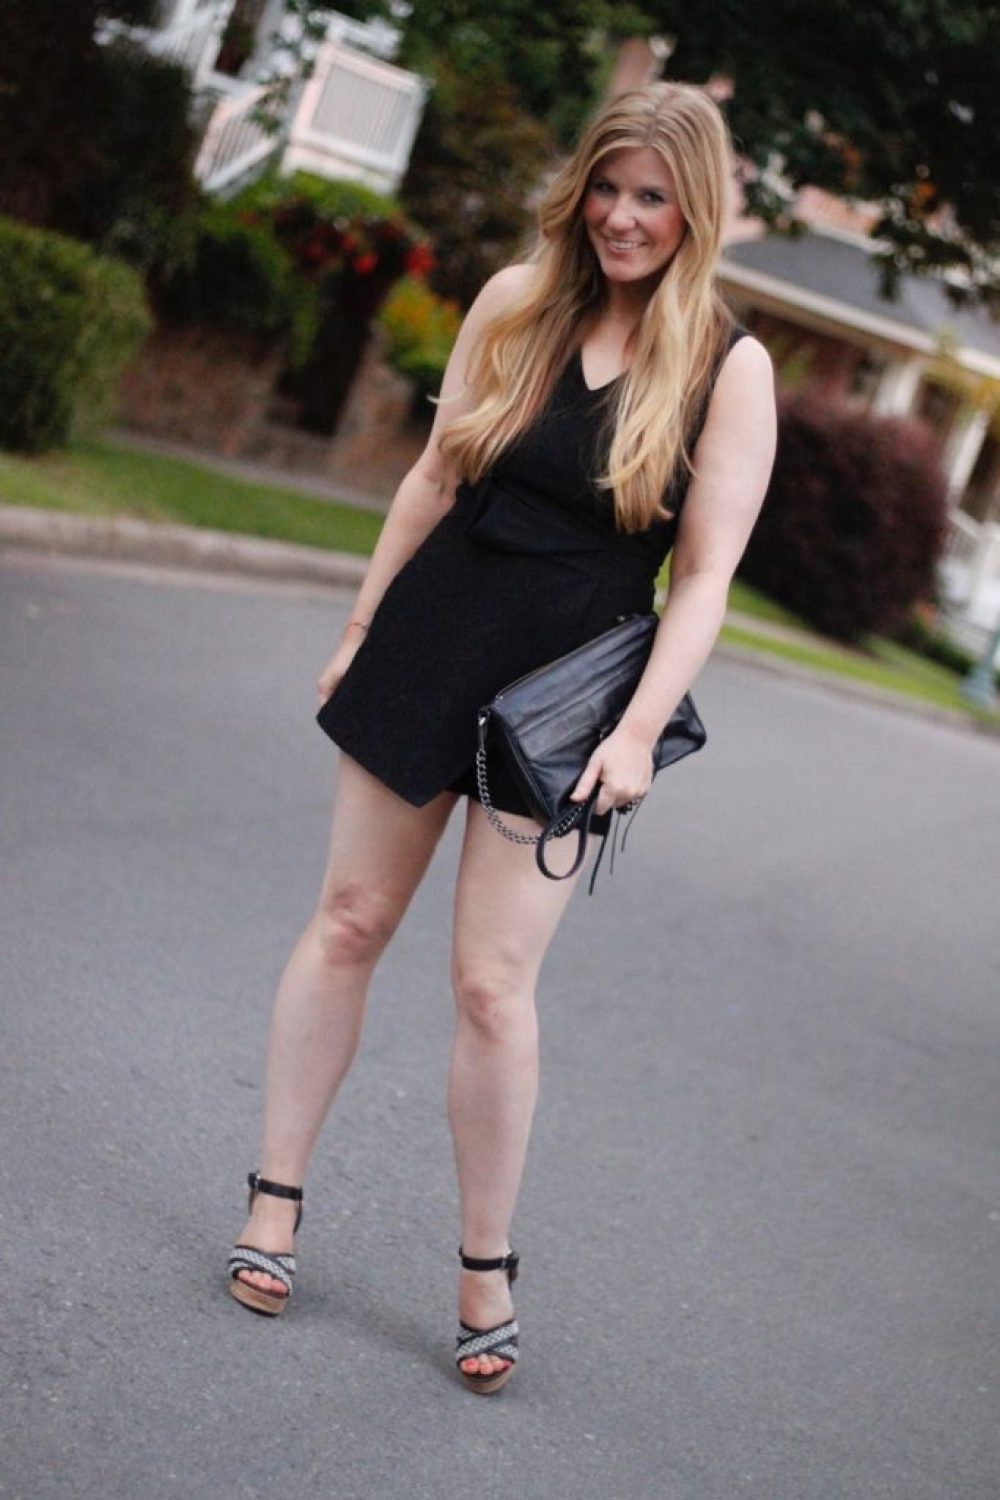 How I Wore My Heels: Really Love a Romper